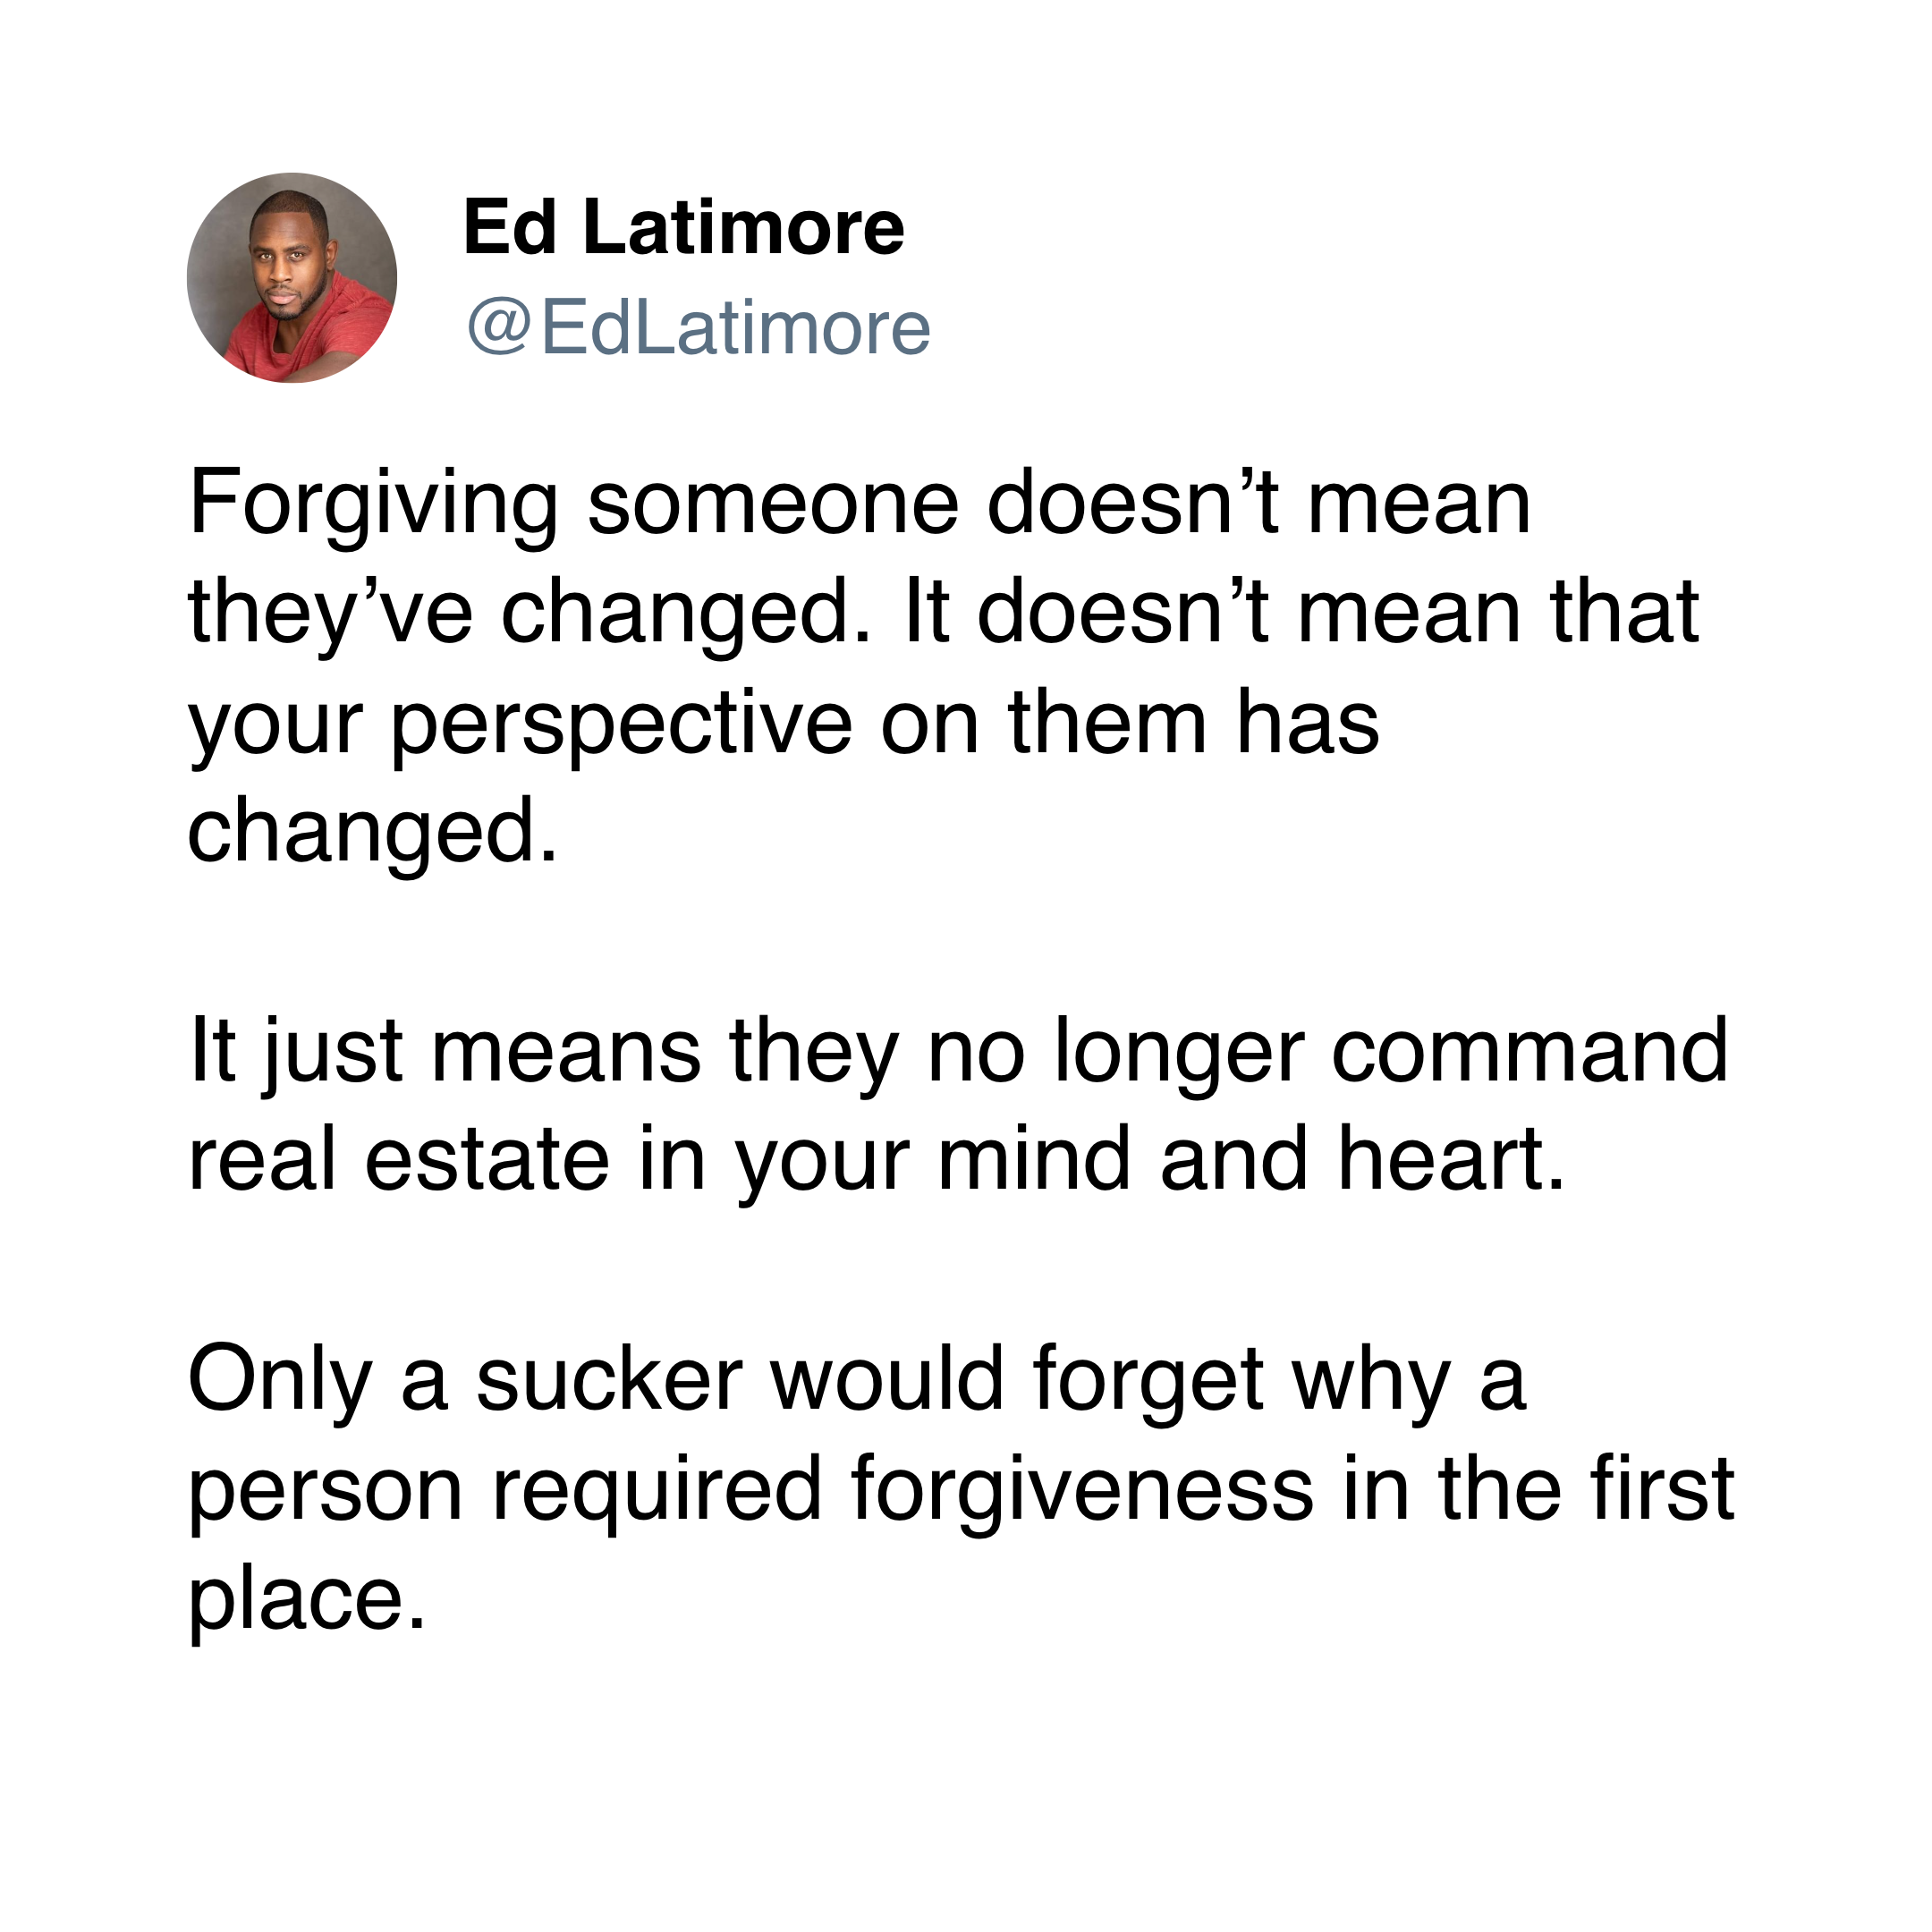 ed latimore forgiveness quotes "forgiving someone doesn't mean that they've changed"